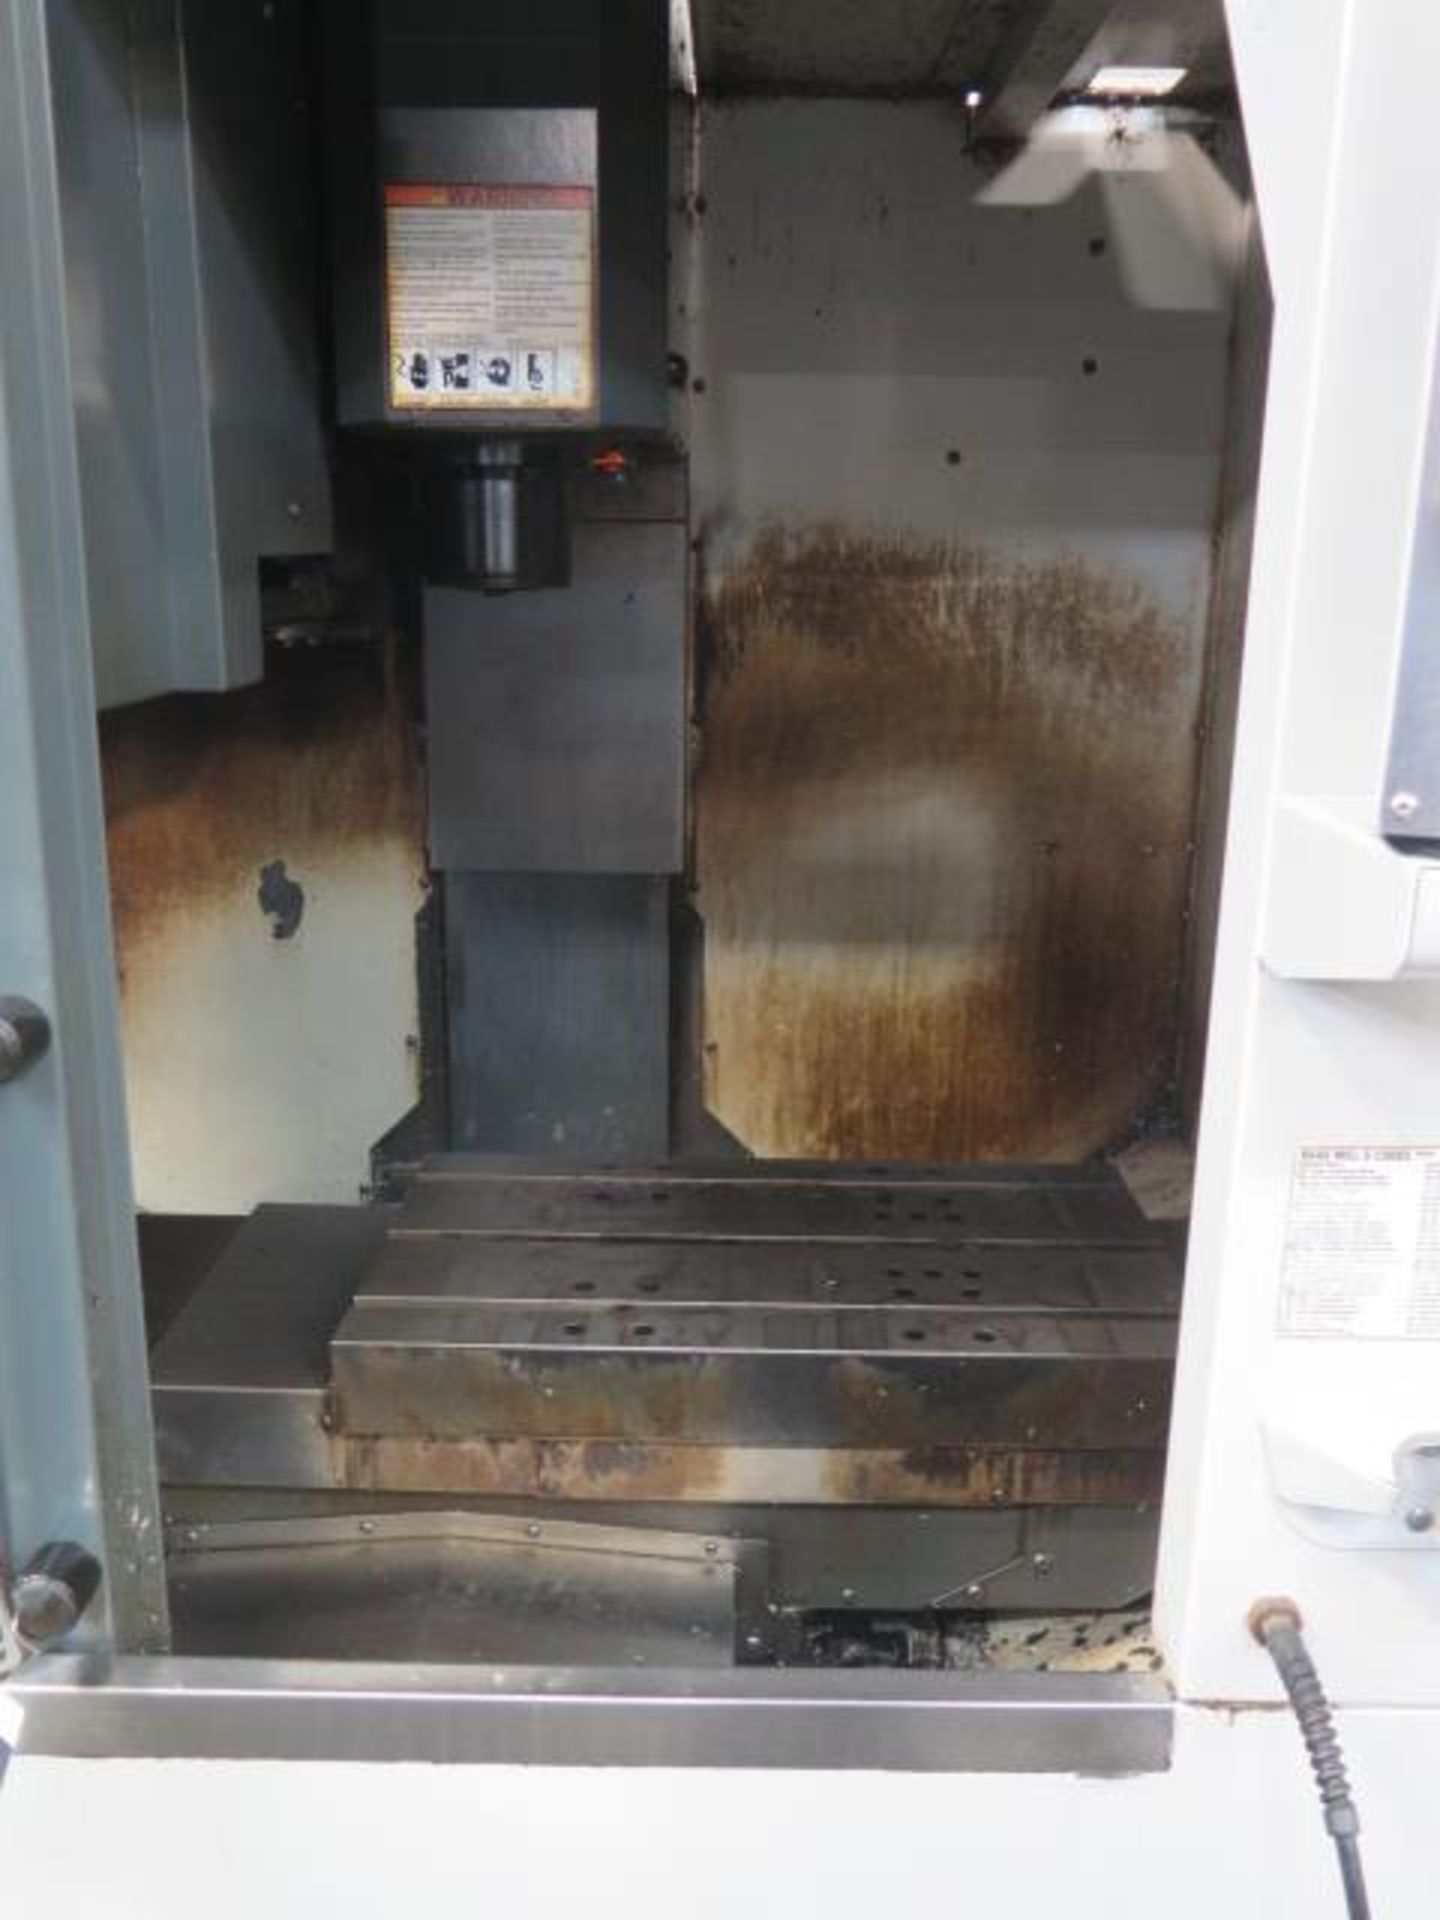 2012 Haas DT-1 4-Axis CNC VMC s/n 1093529 w/ Haas Controls, 20-Station ATC, SOLD AS IS - Image 4 of 13